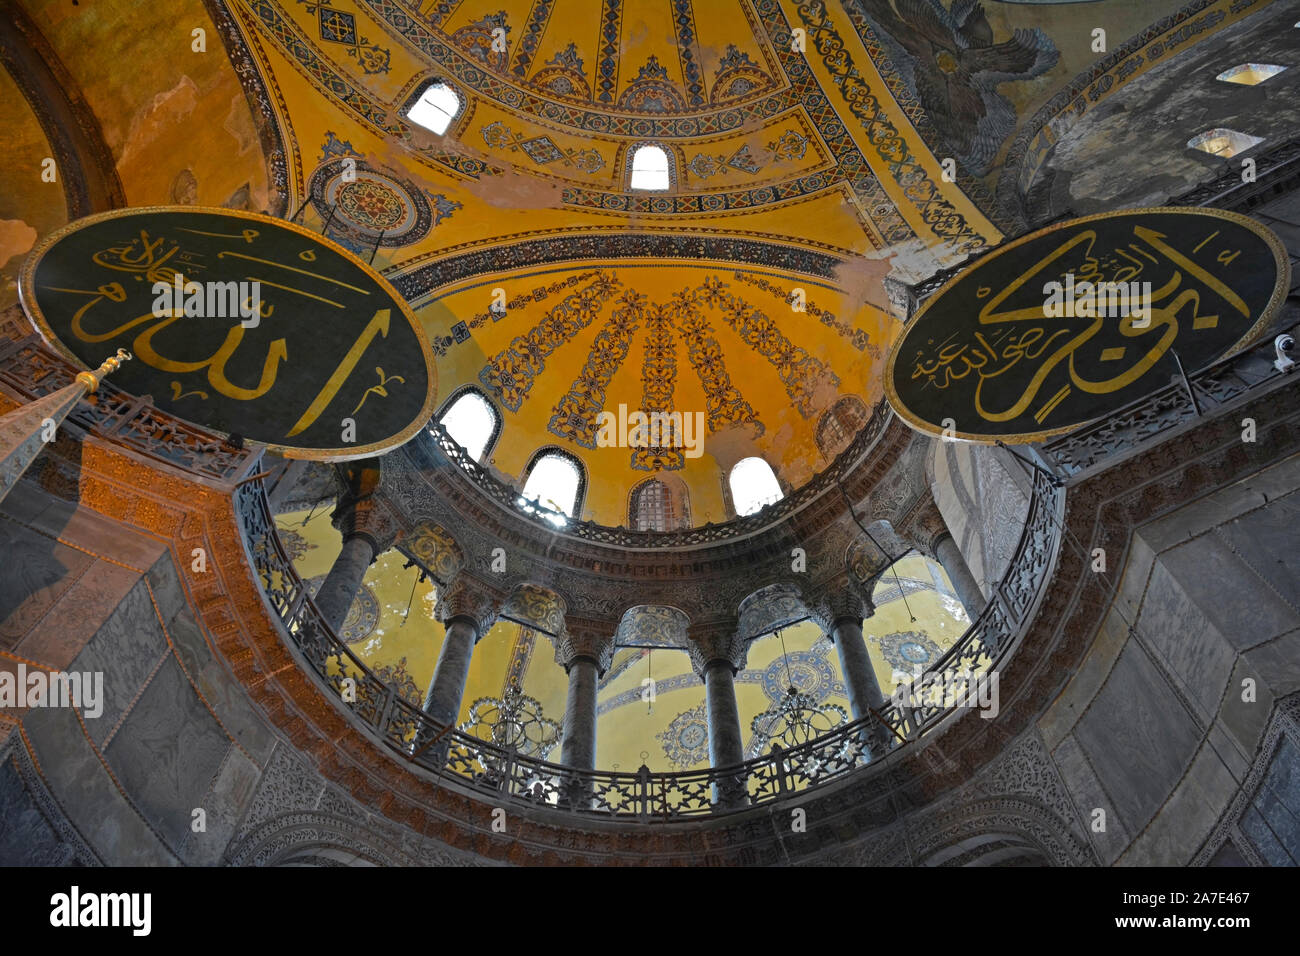 Ayasofia or Hagia Sofia in Sultanahmet, Istanbul, Turkey. Built in 537 AD as a church, it was converted into a mosque in the mid-1400s. Stock Photo